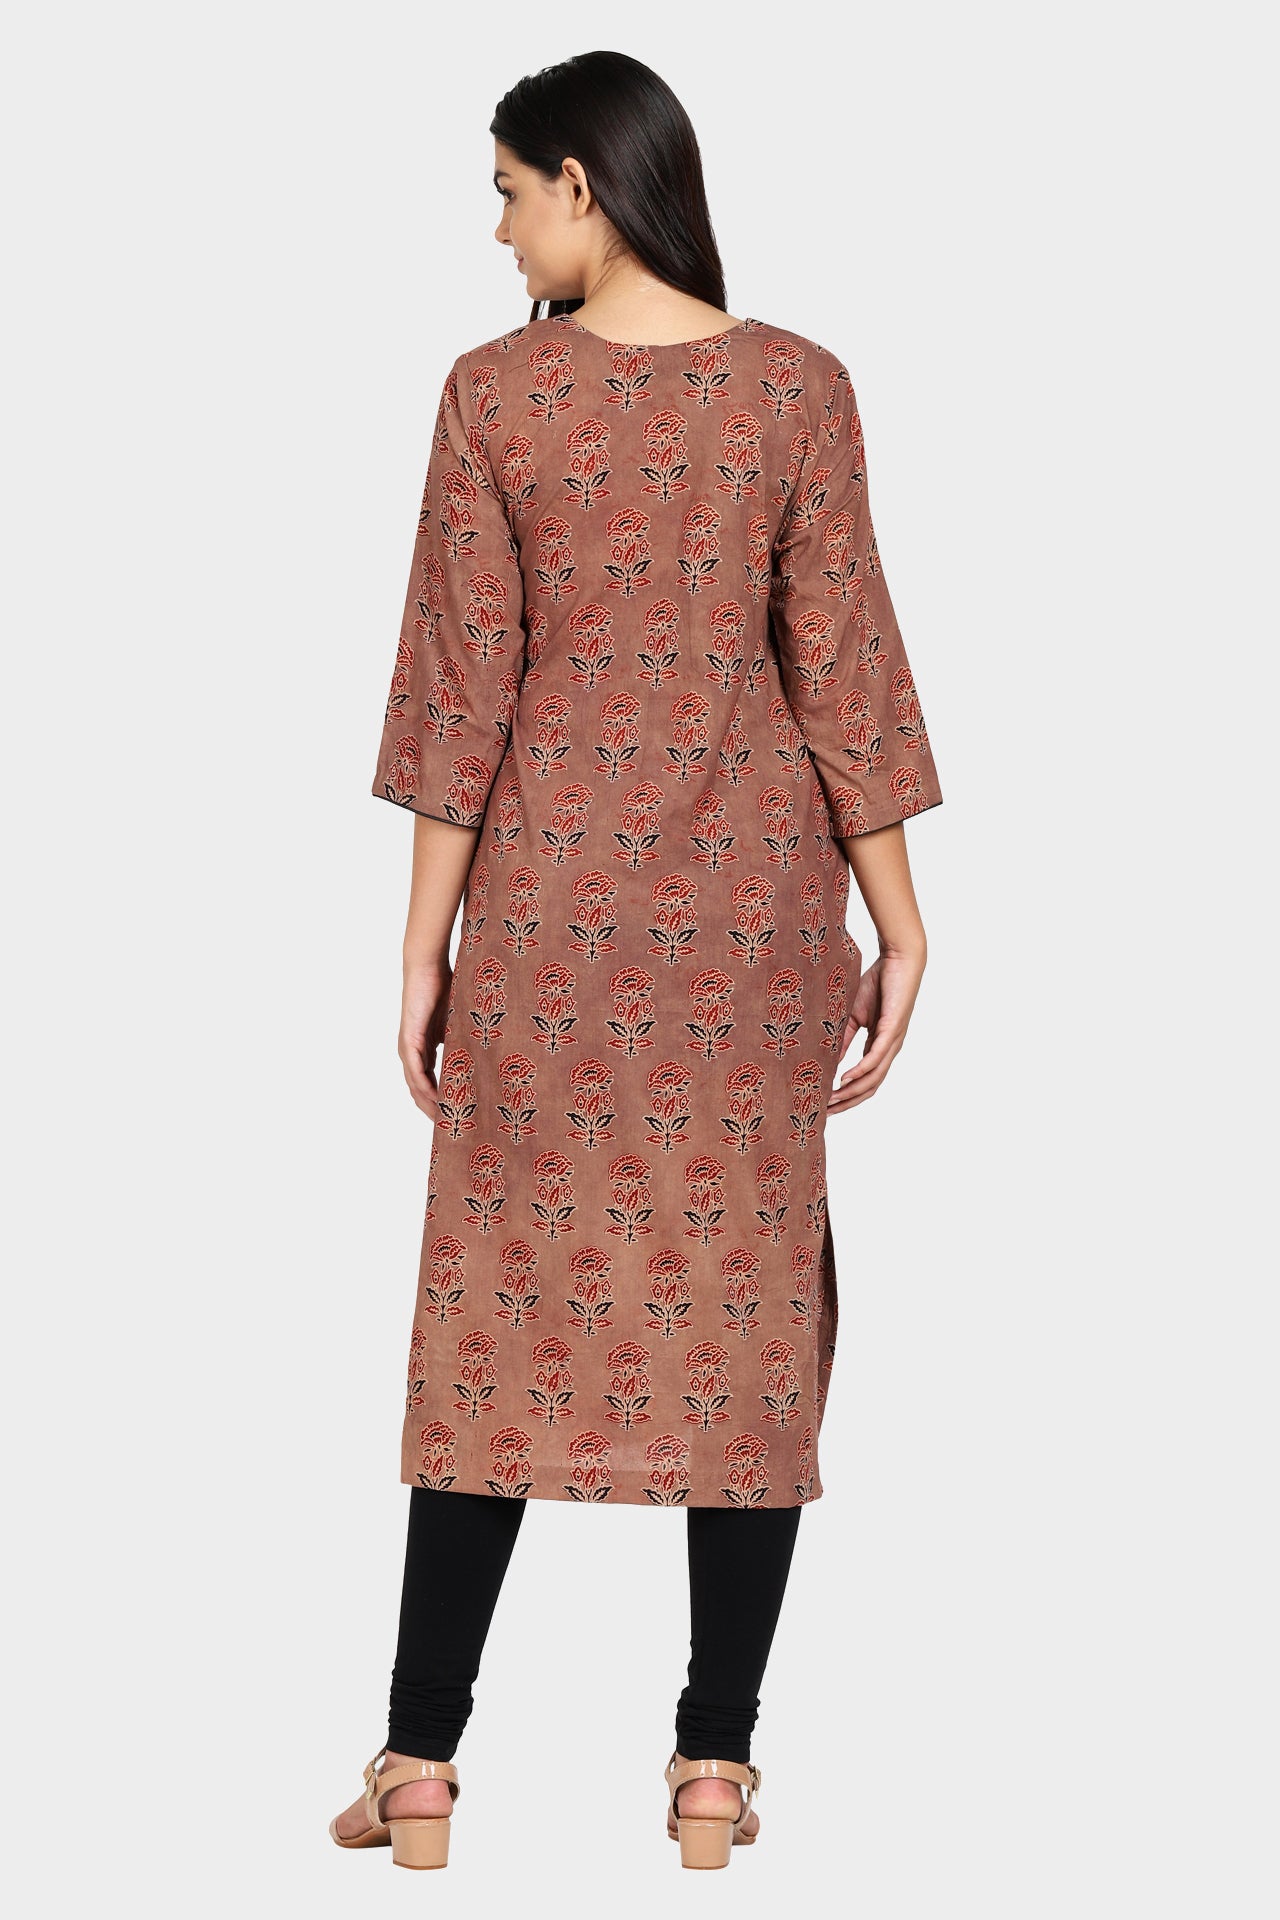 Brown Floral Print Straight Cotton Kurta with Black Detailing